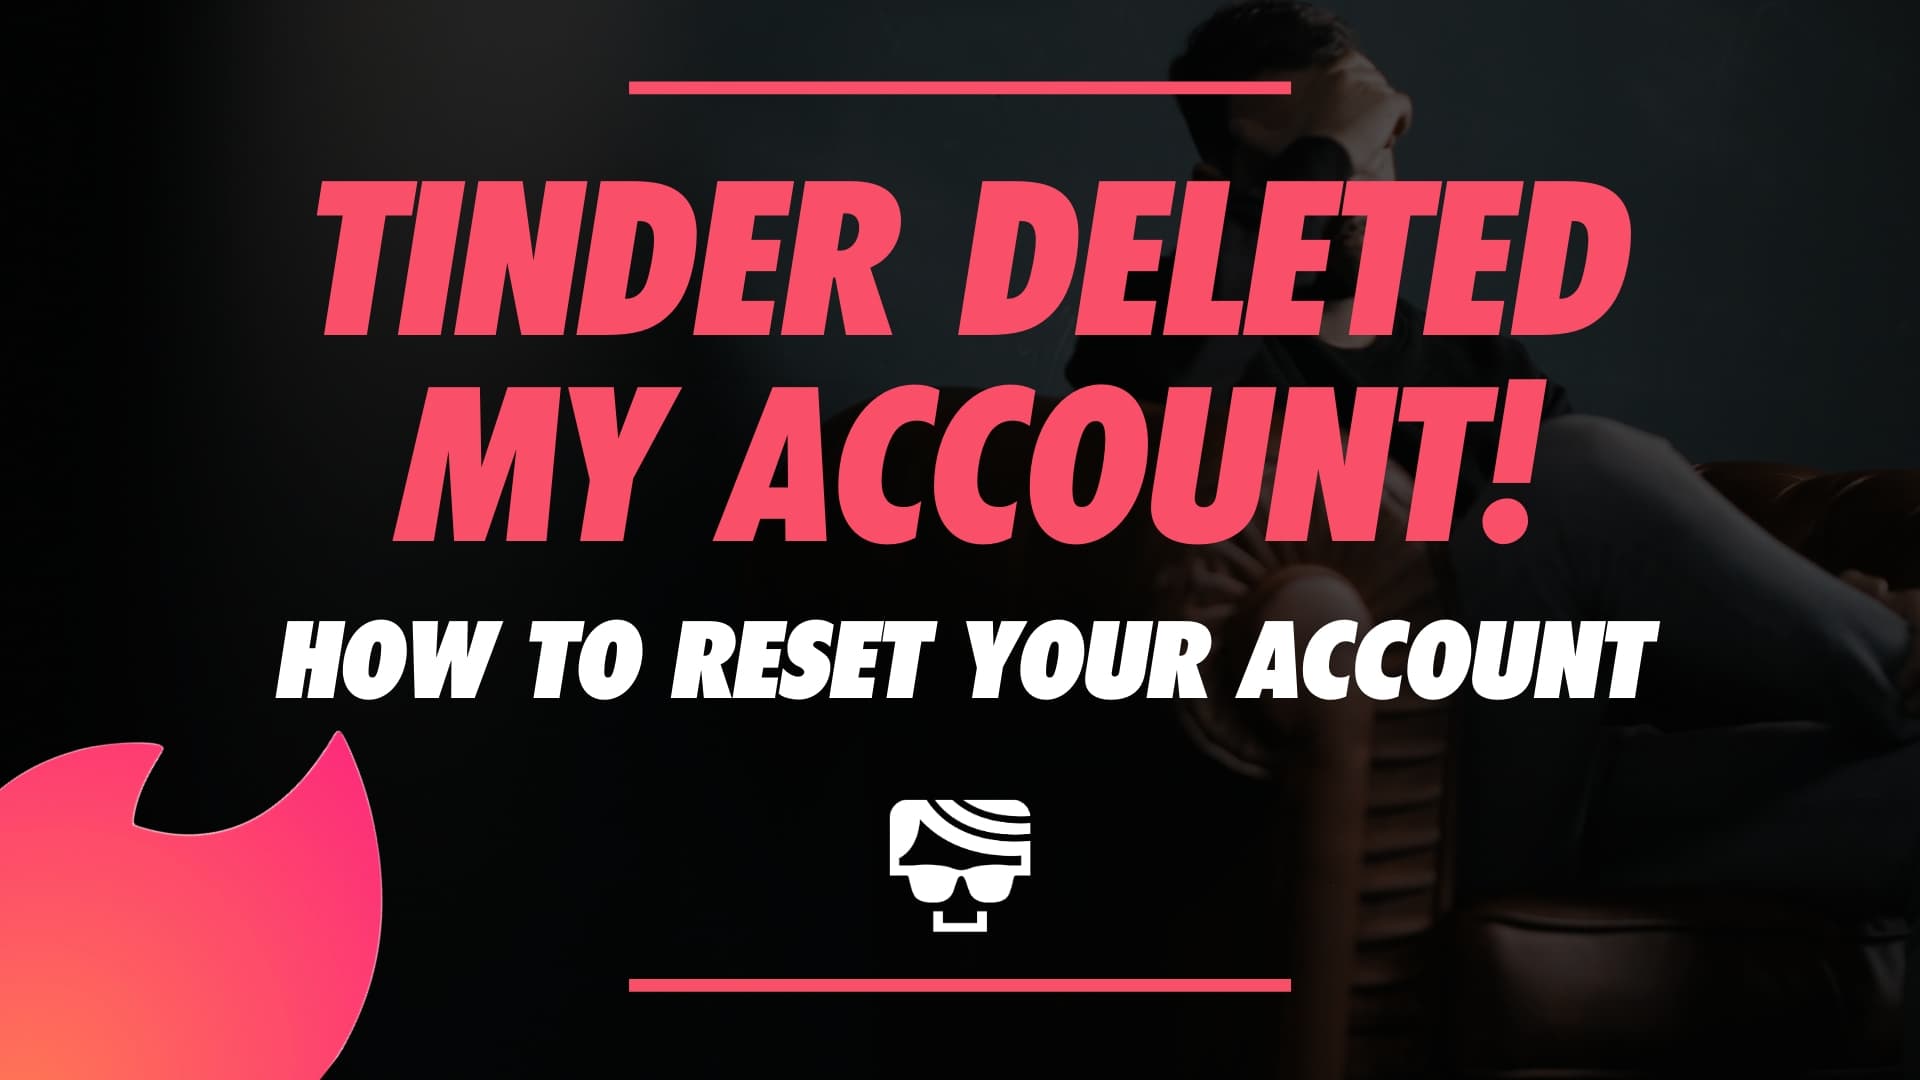 Why does tinder say failed to delete account?